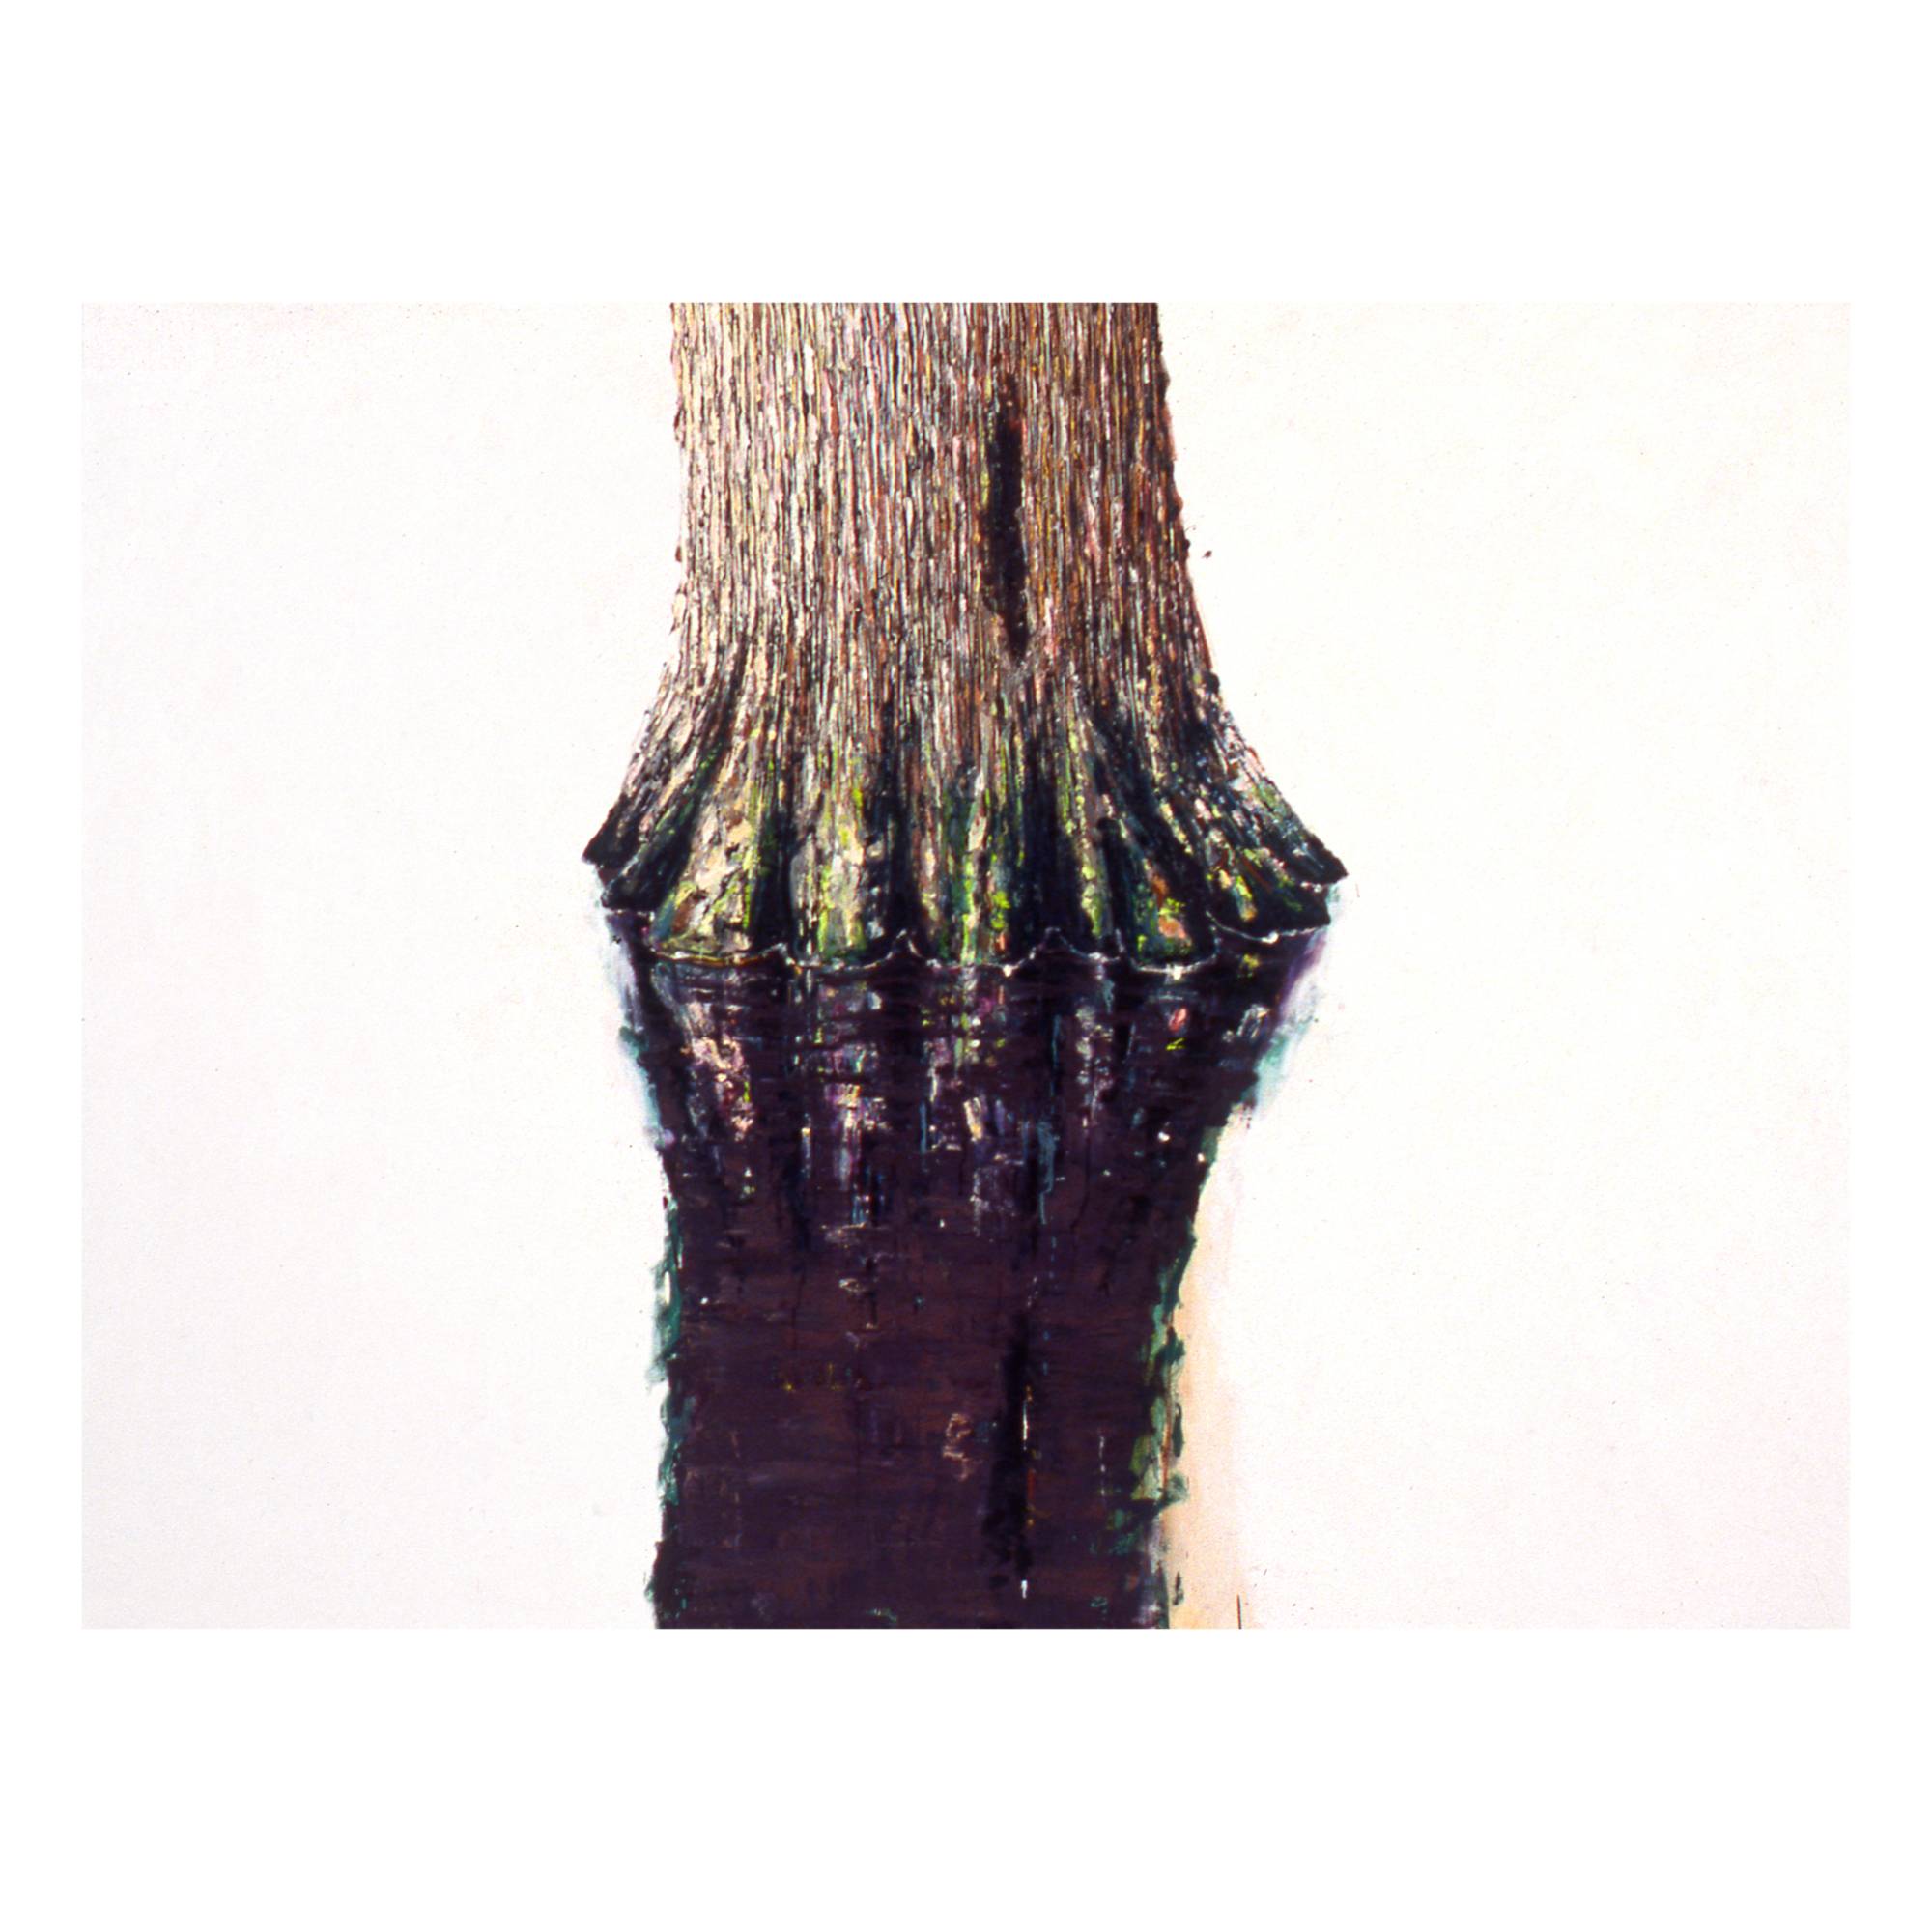 Painting by Vera Klement titled 'Narcisse #2' depicting the base of a tree trunk and it's reflection below floating on a white background